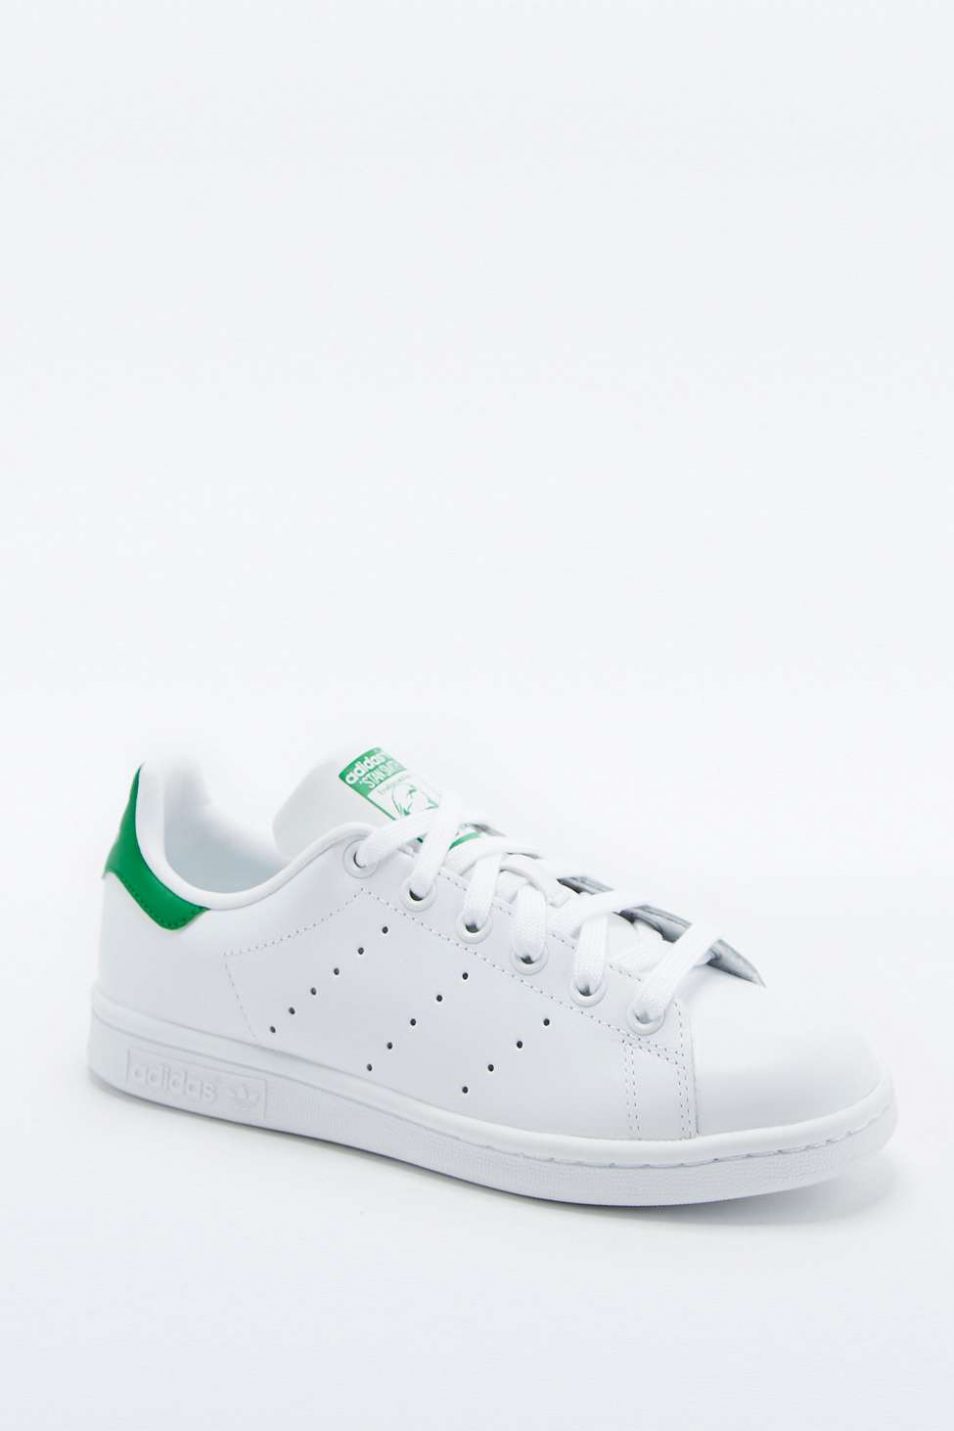 adidas Originals Stan Smith White and Green Trainers 1